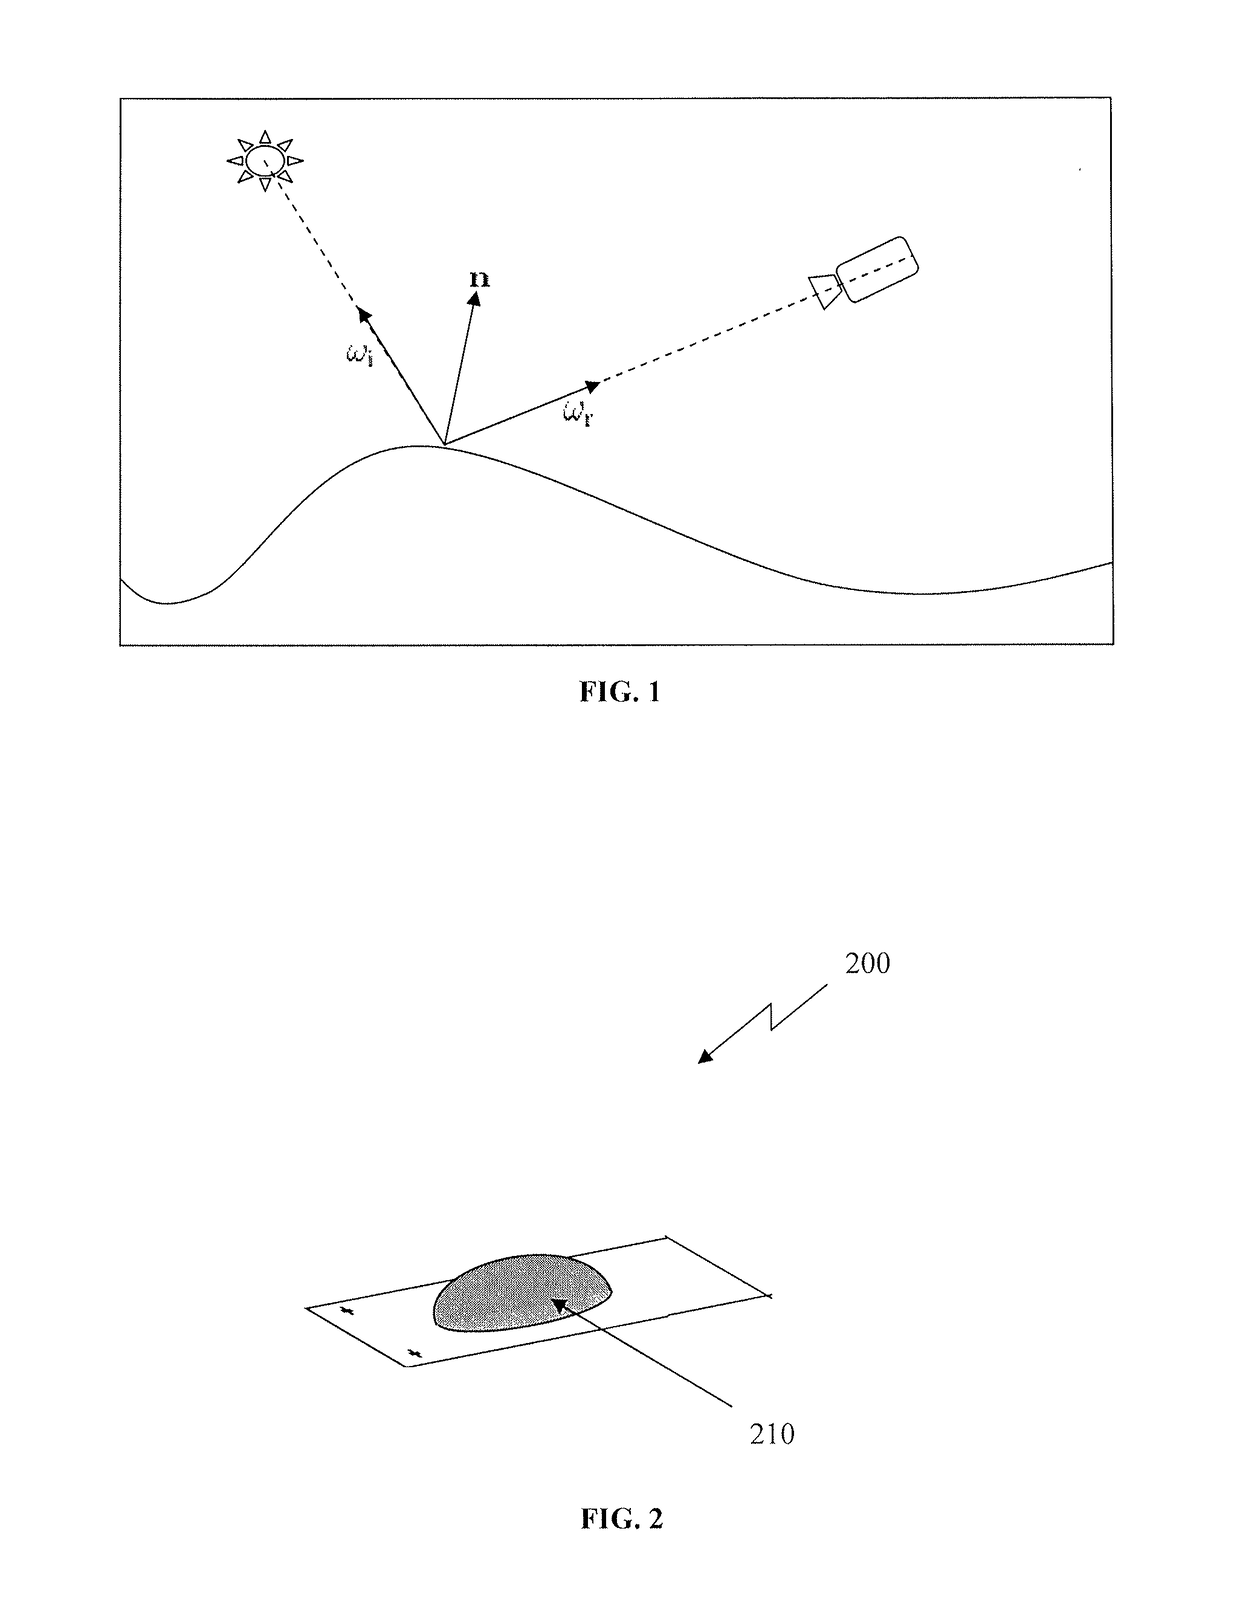 Imaging apparatus, systems and methods